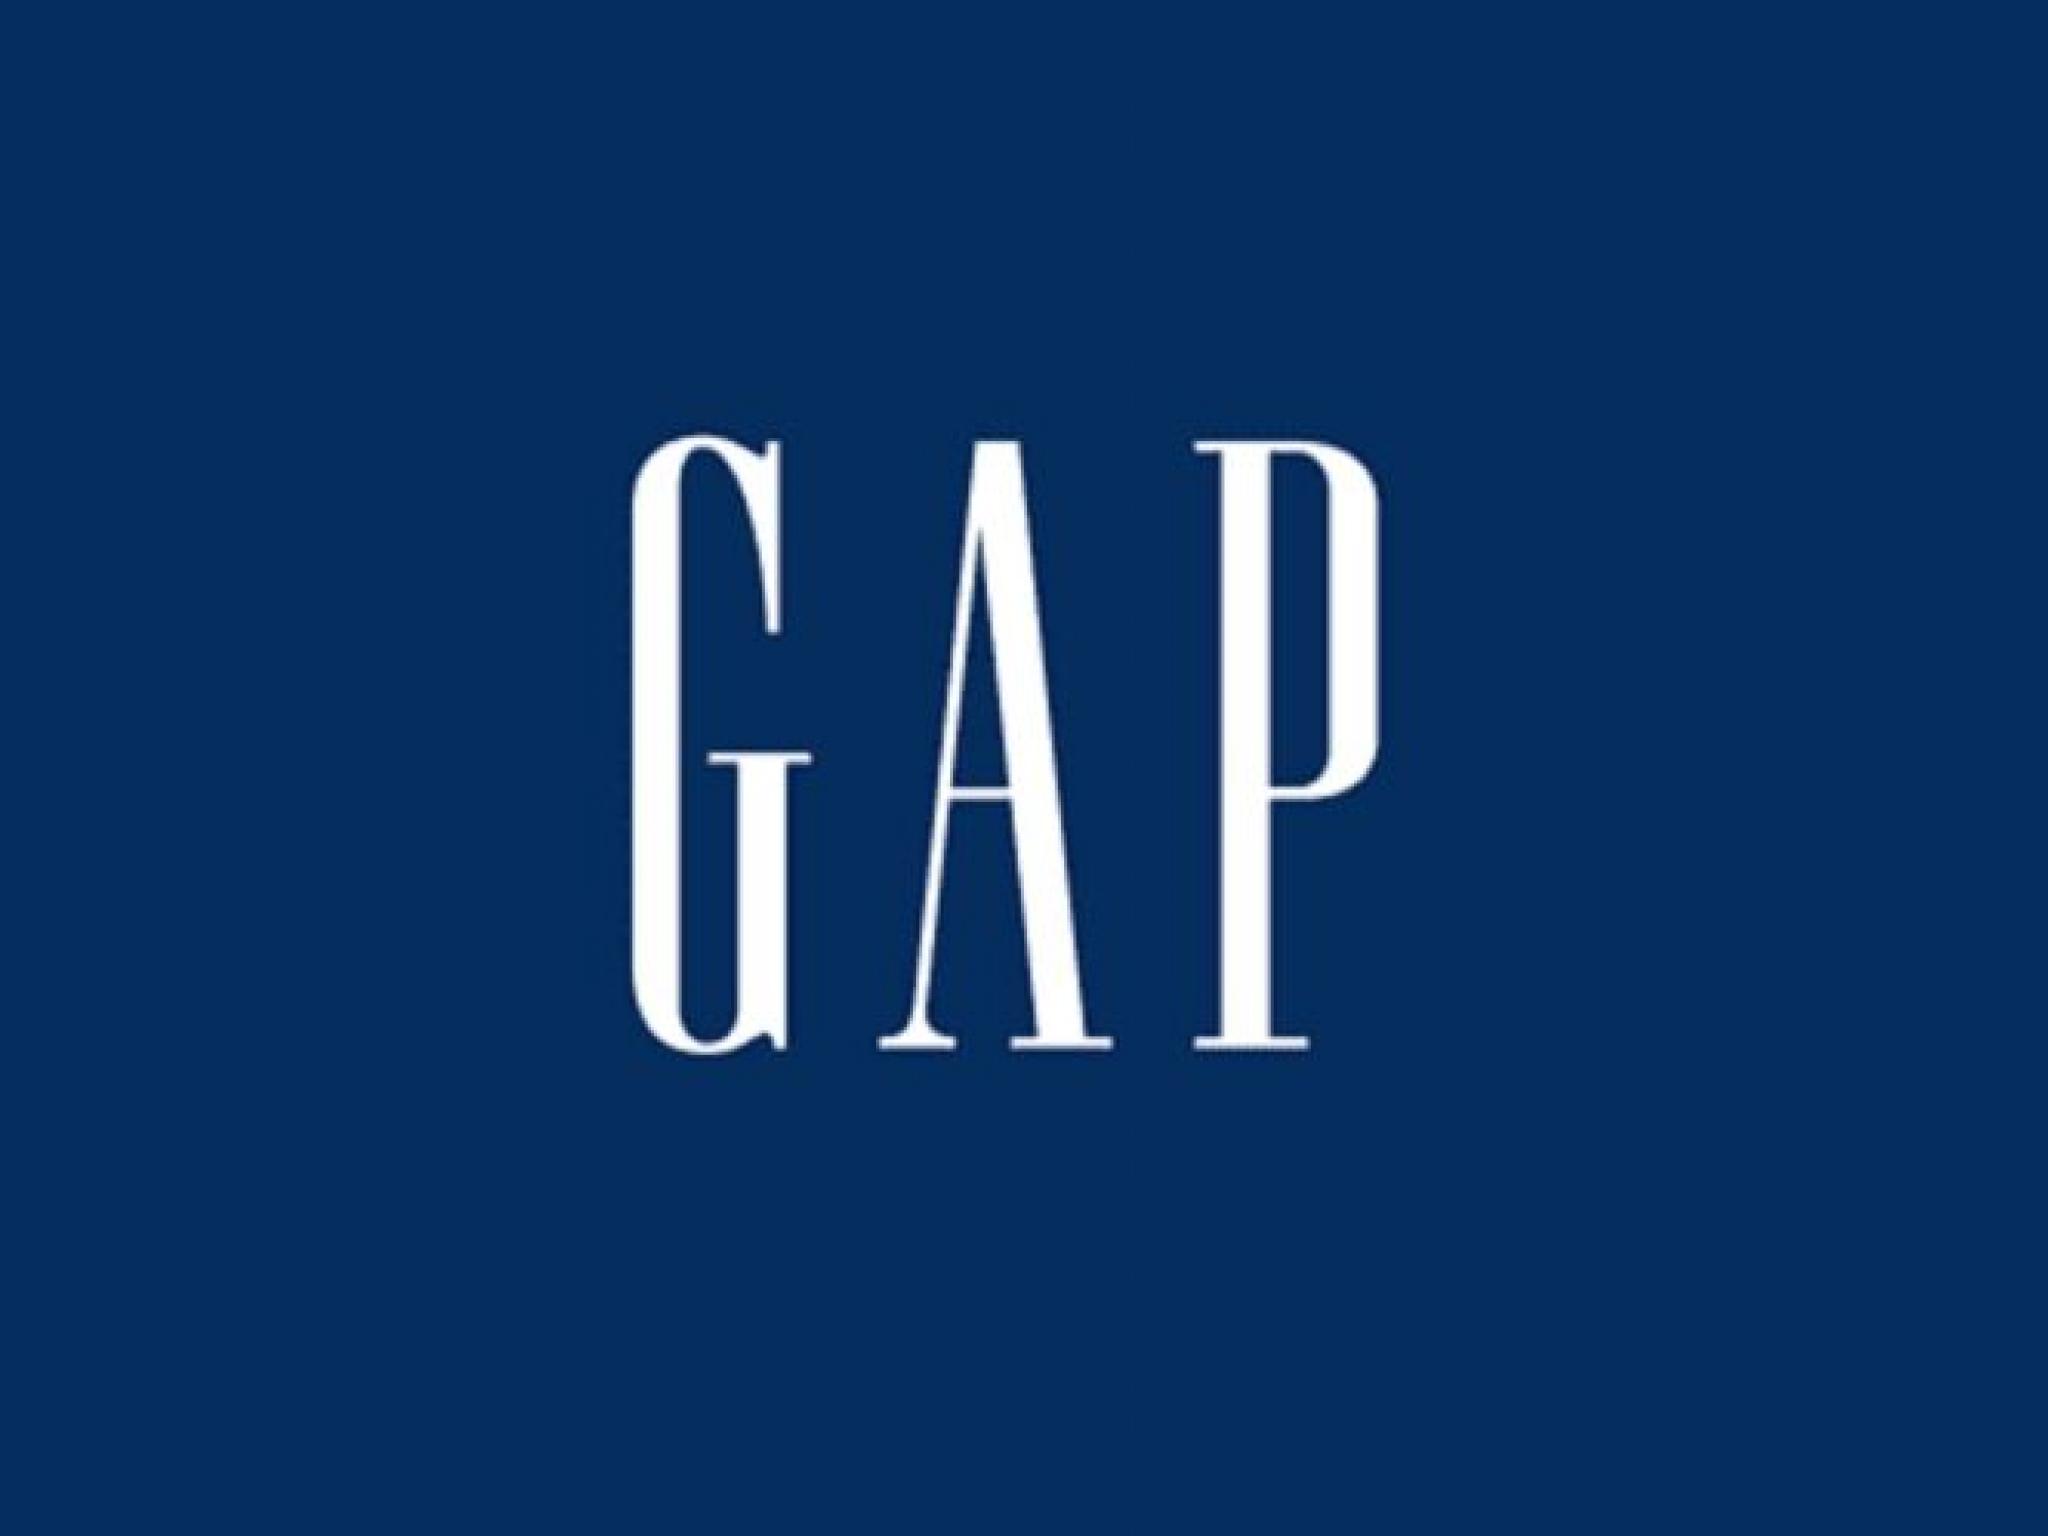  gap-analysts-boost-their-forecasts-following-upbeat-results 